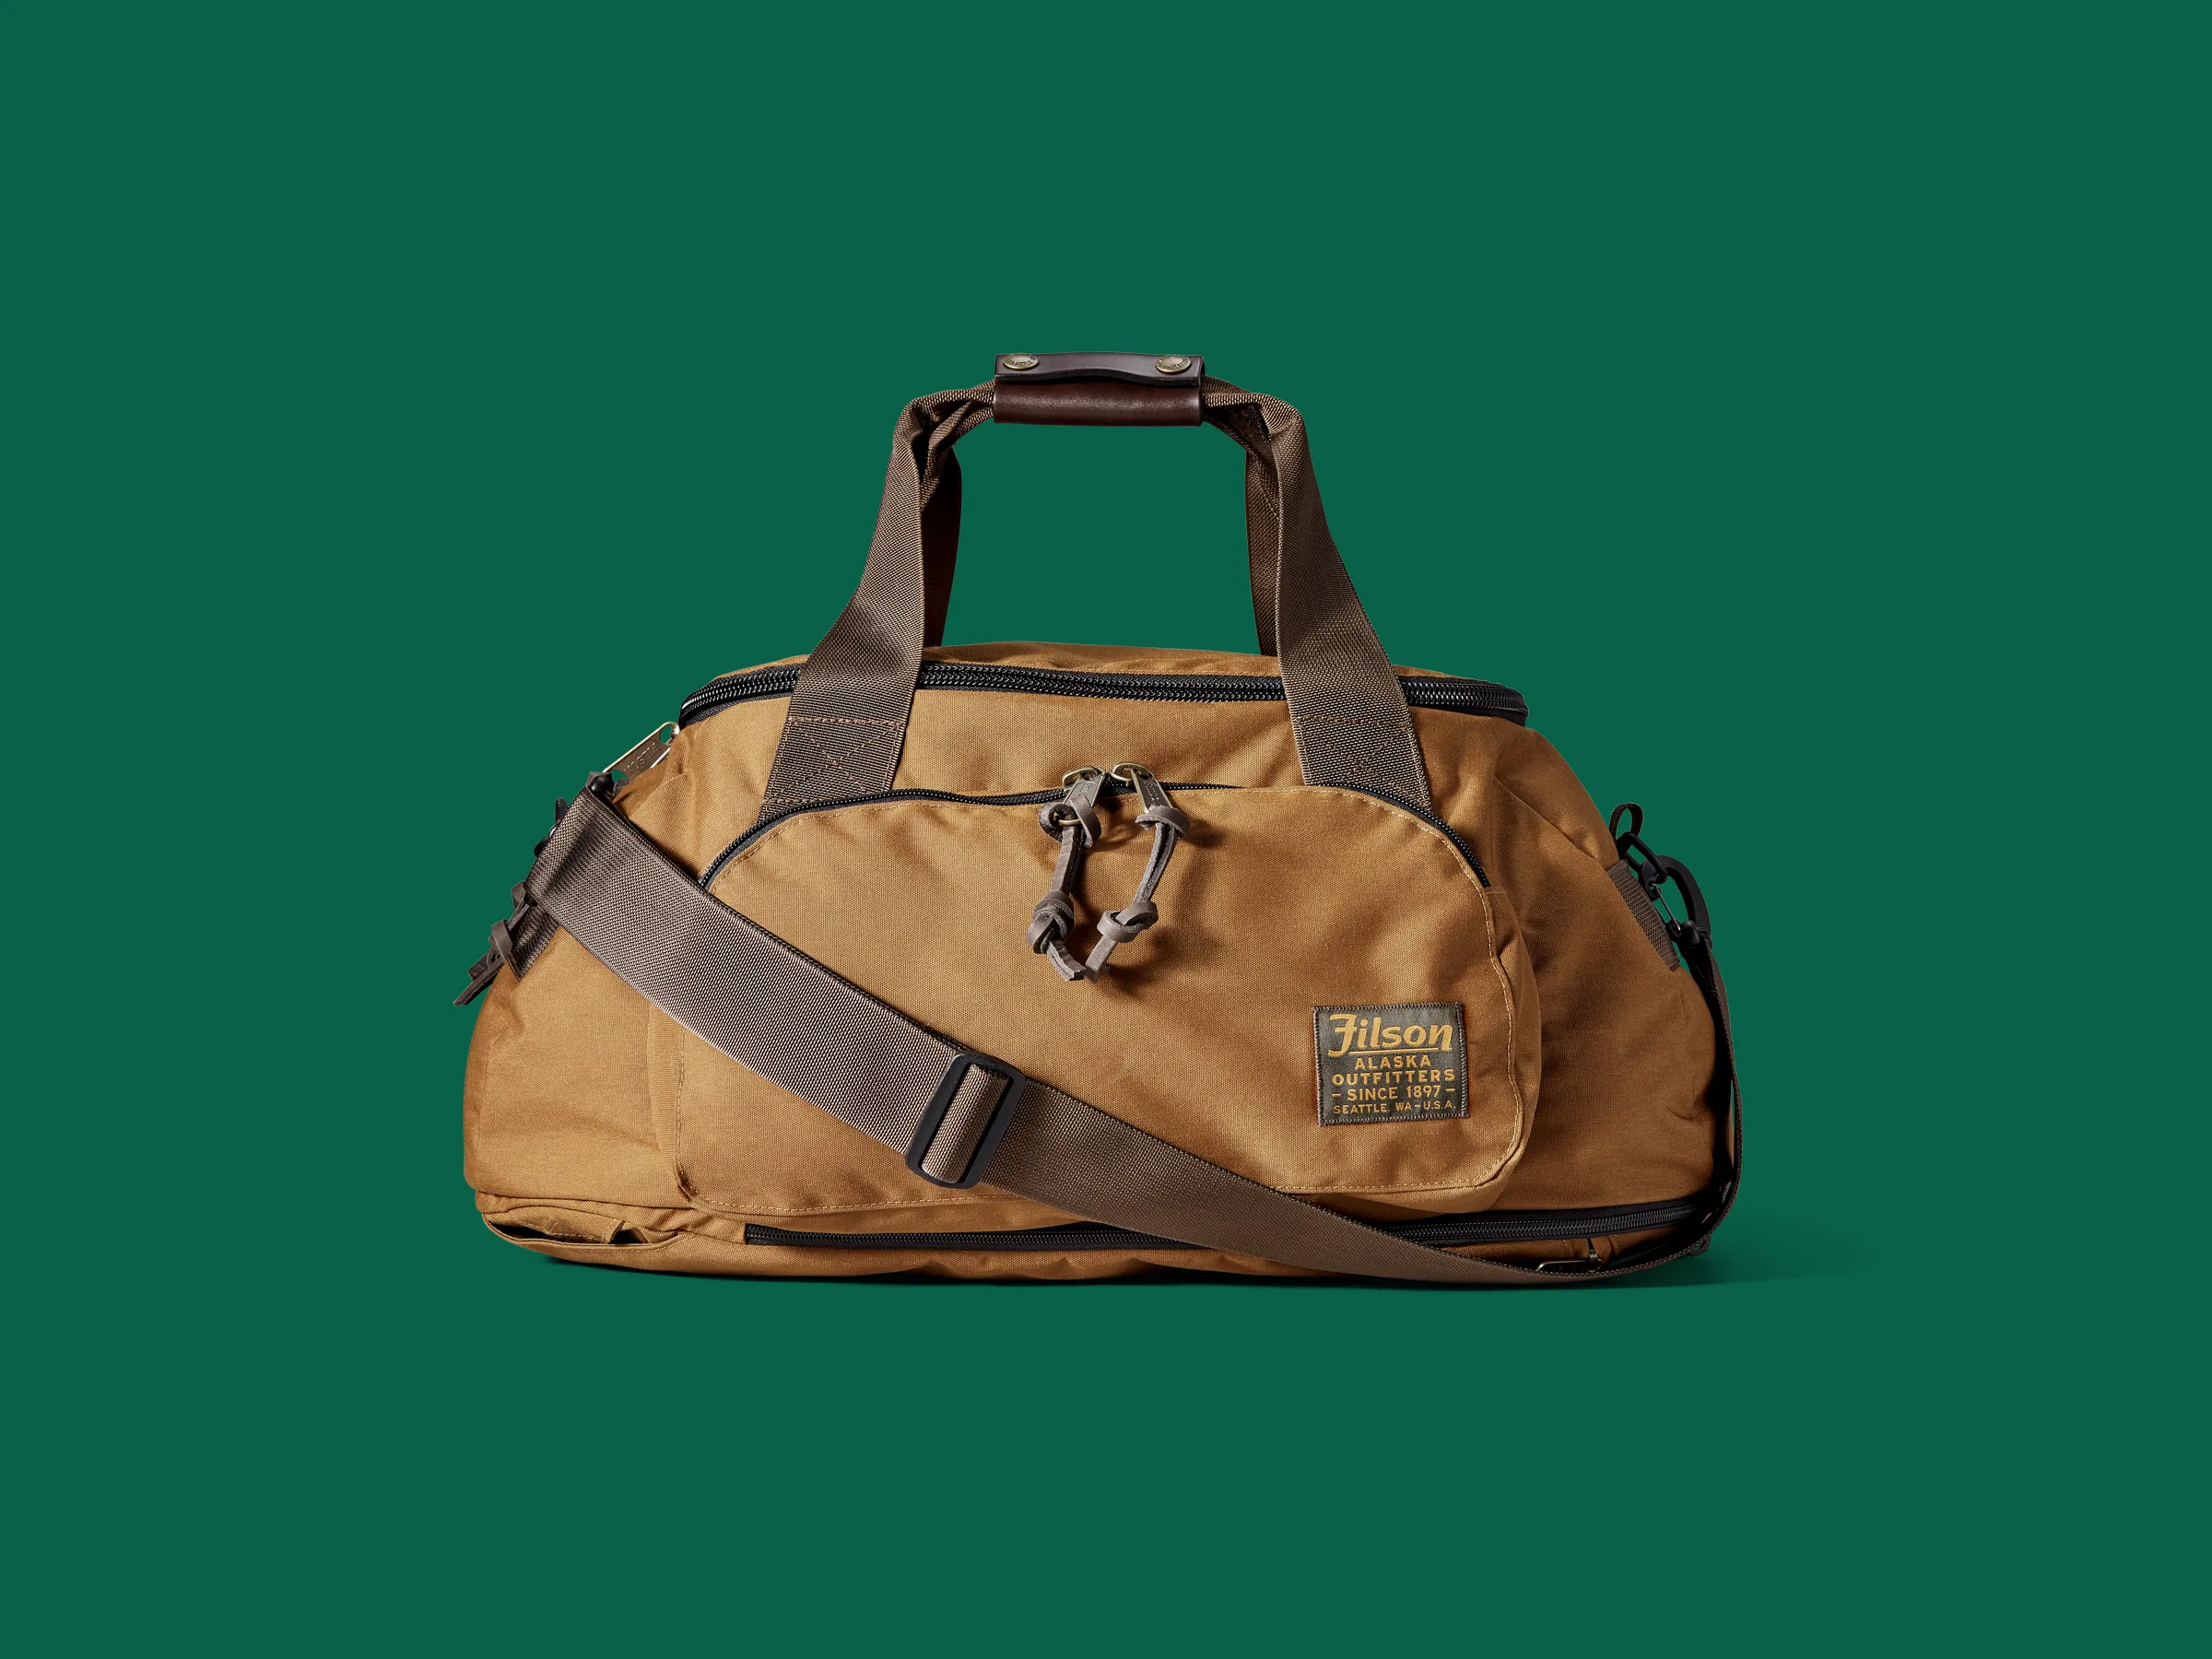 Find your duffle bag